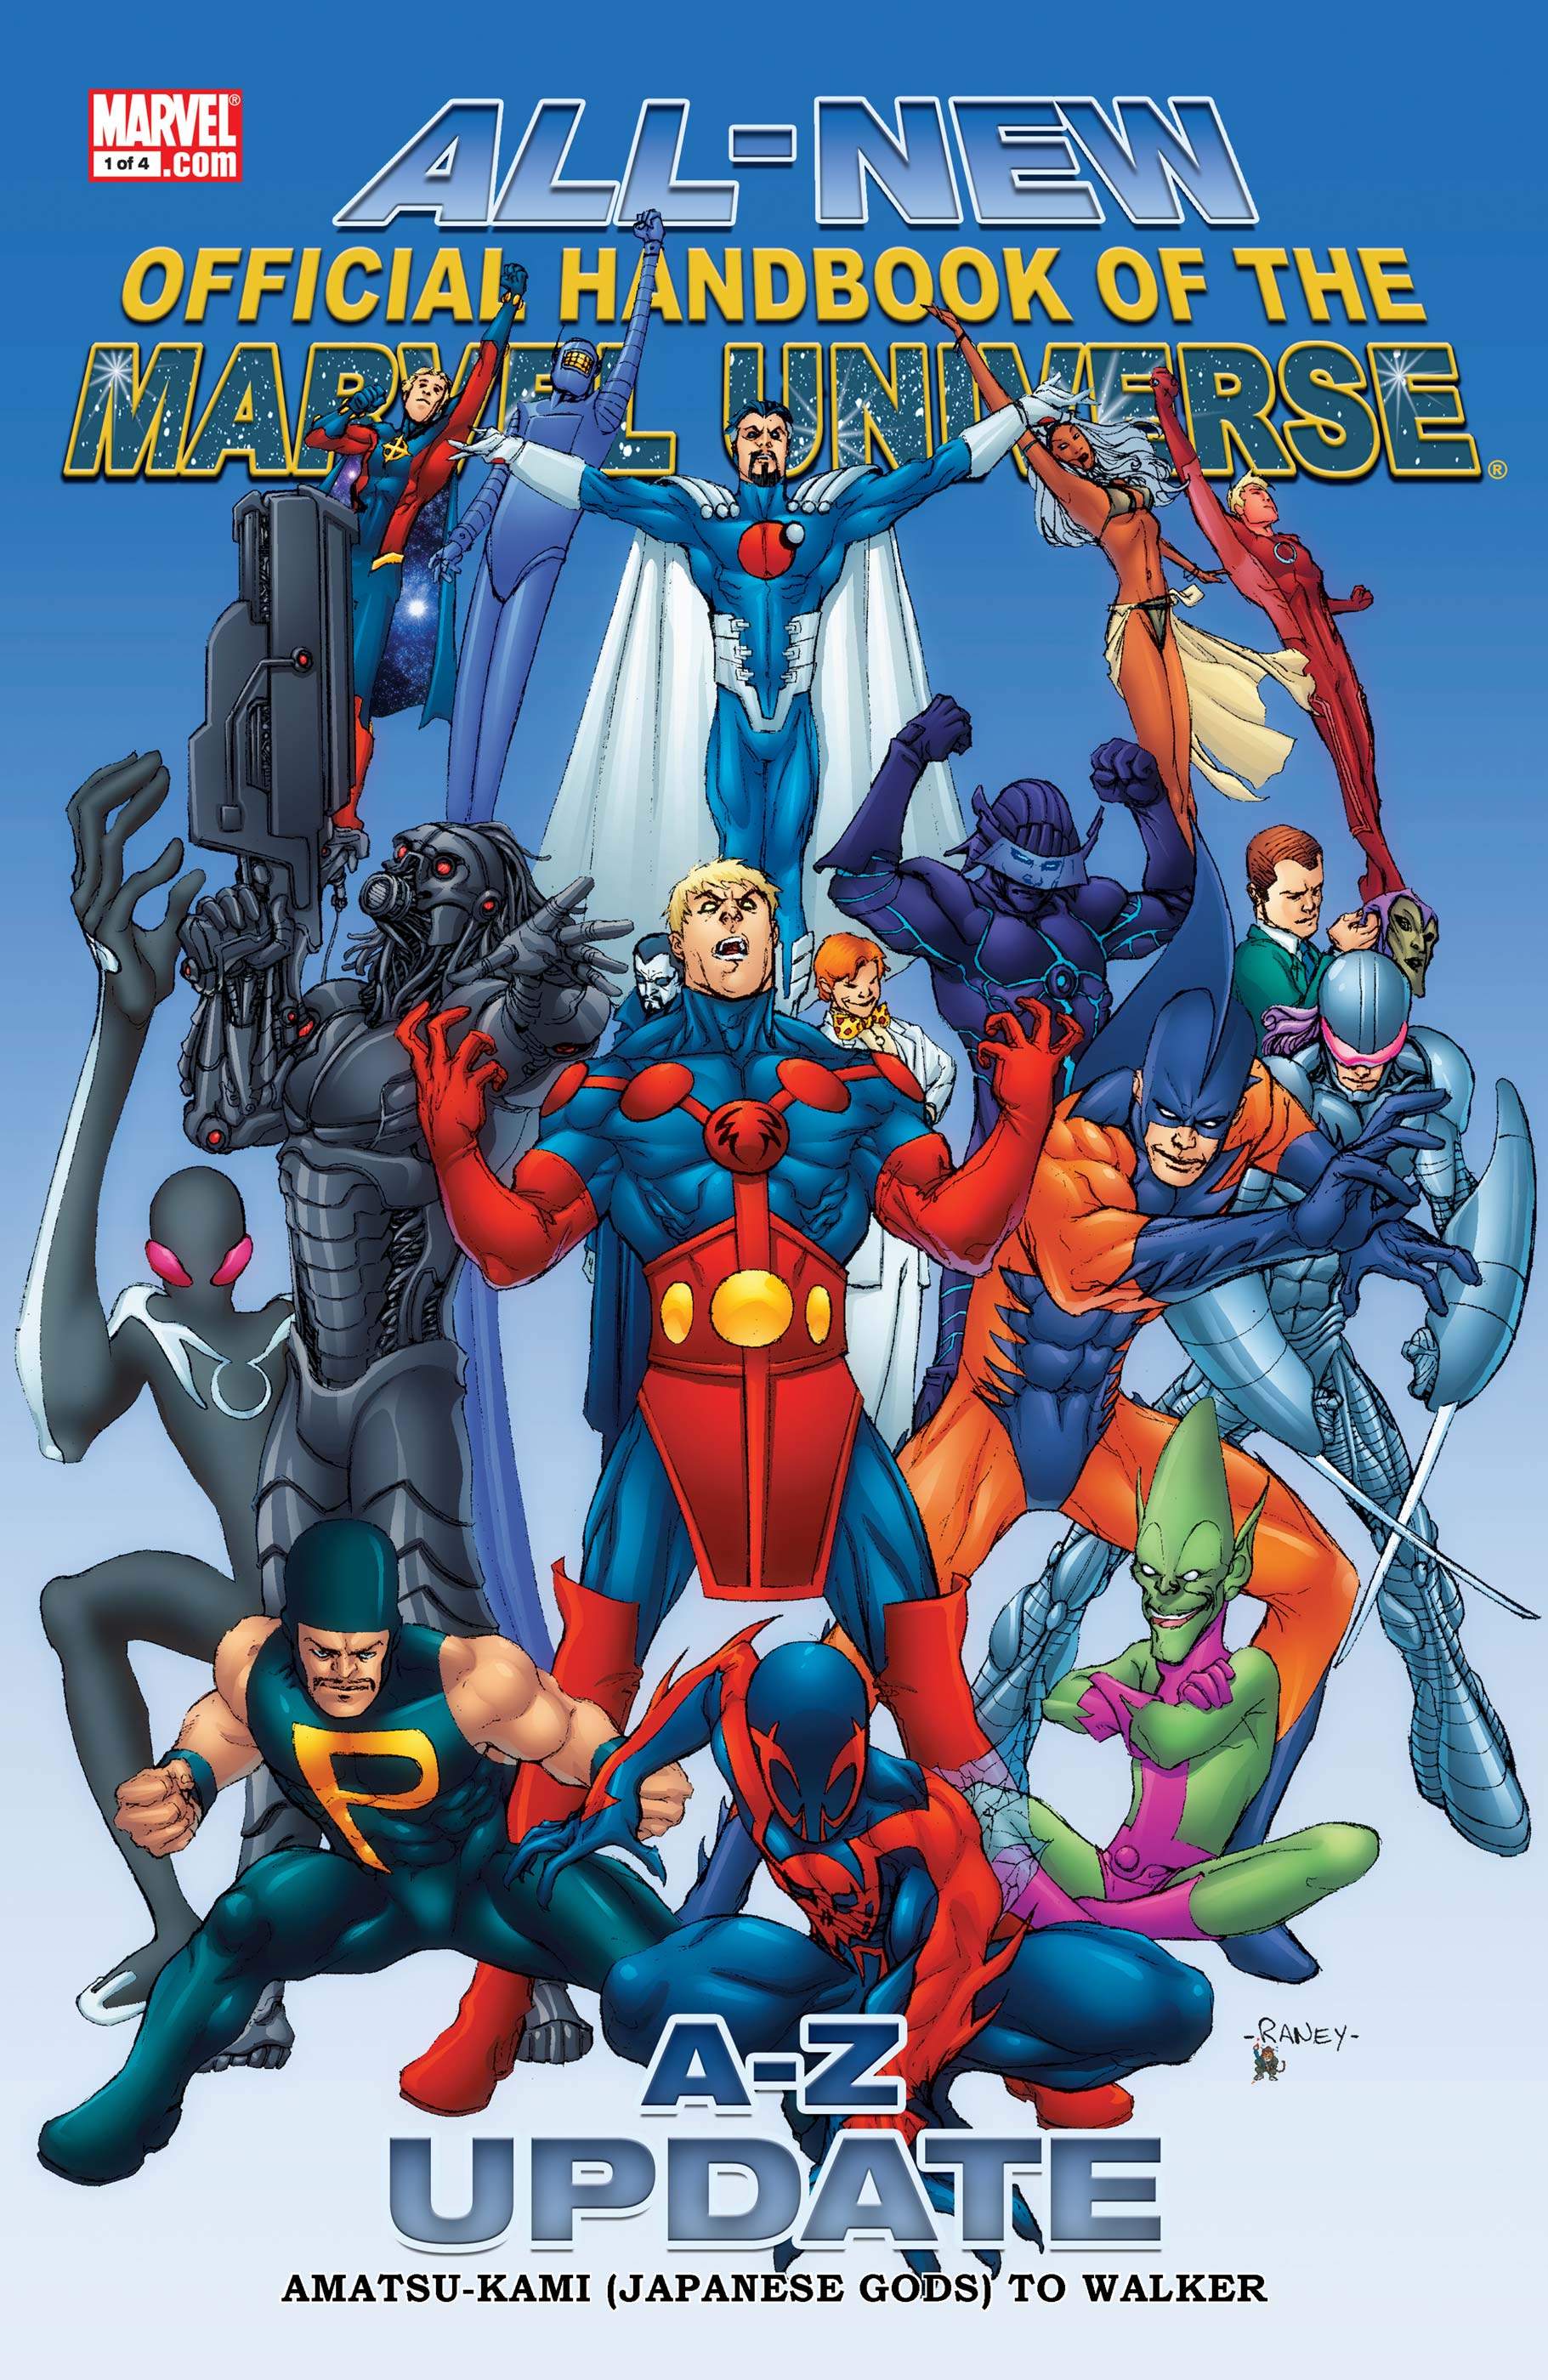 All-New Official Handbook of the Marvel Universe a to Z: Update (2007) #1